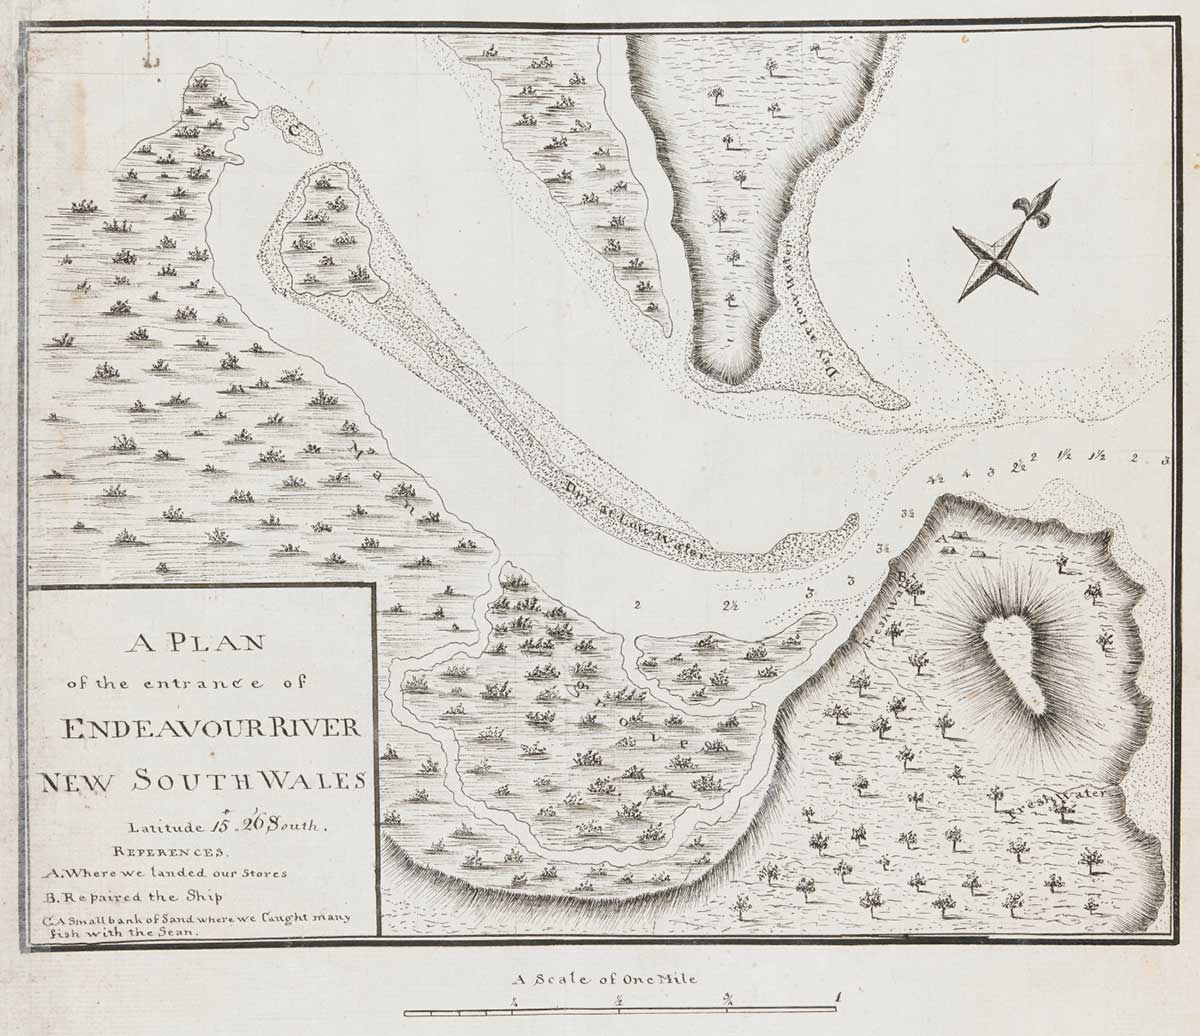 Map showing the estuary of the Endeavour River. It’s title is A plan of the entrance of Endeavour River, New south Wales. Latitude 15’ 26” South. References. A. Where we landed our stores. B Repaired the Ship. C A small bank of Sand where we caught many fish with the [seine net].